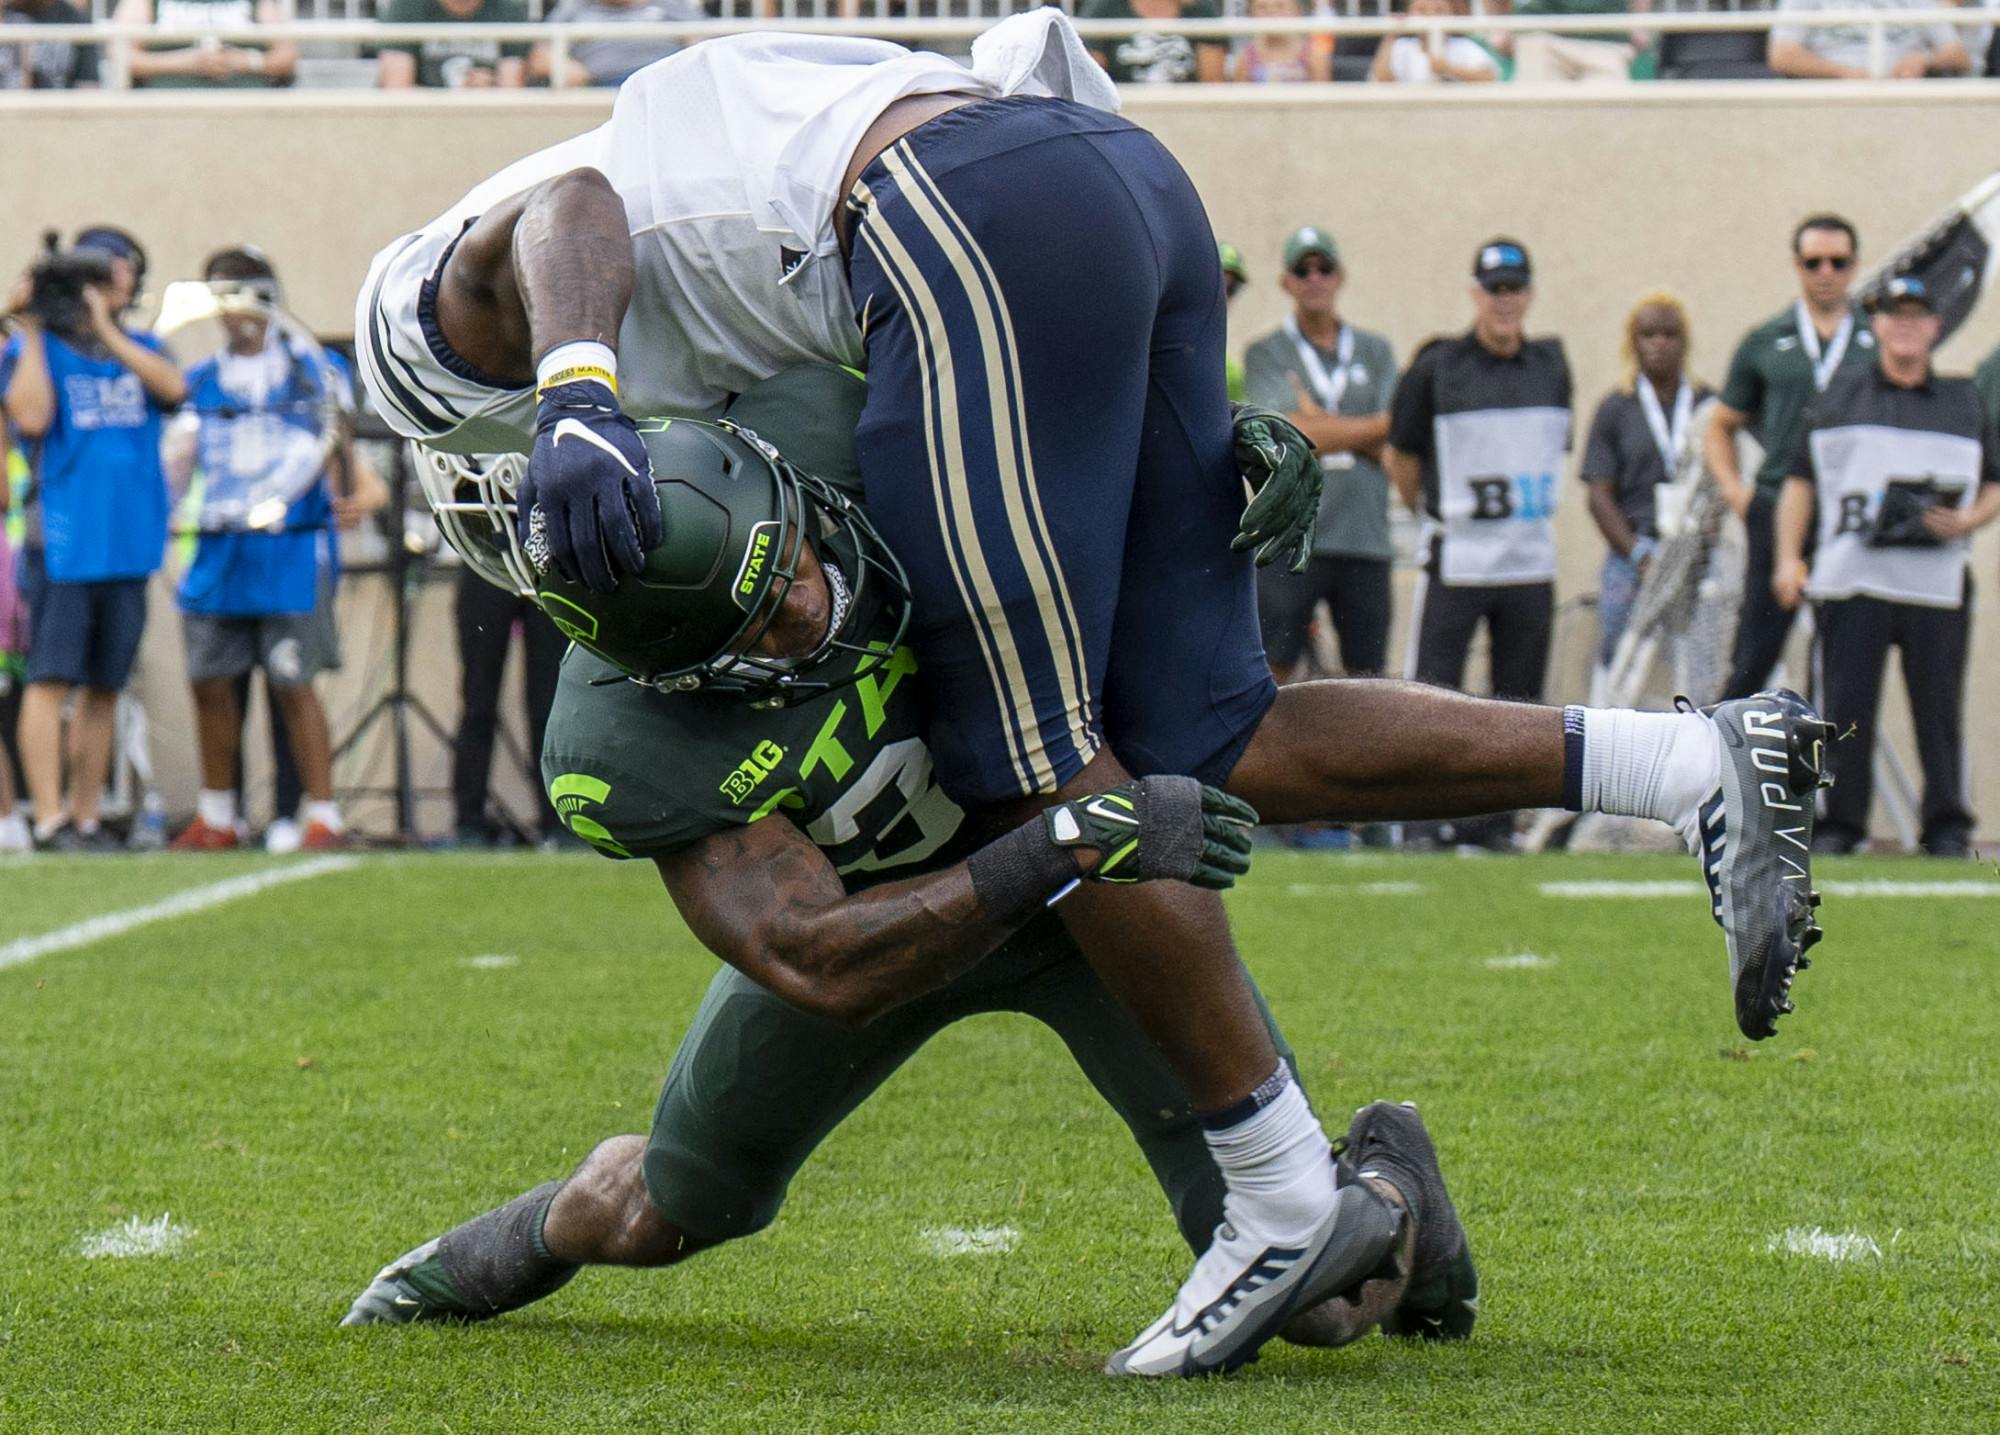 <p>Senior cornerback Kendell Brooks, 33, tackles TJ Banks, 5, for a turnover during Michigan State’s game against Akron on Saturday, Sept. 10, 2022 at Spartan Stadium. </p>